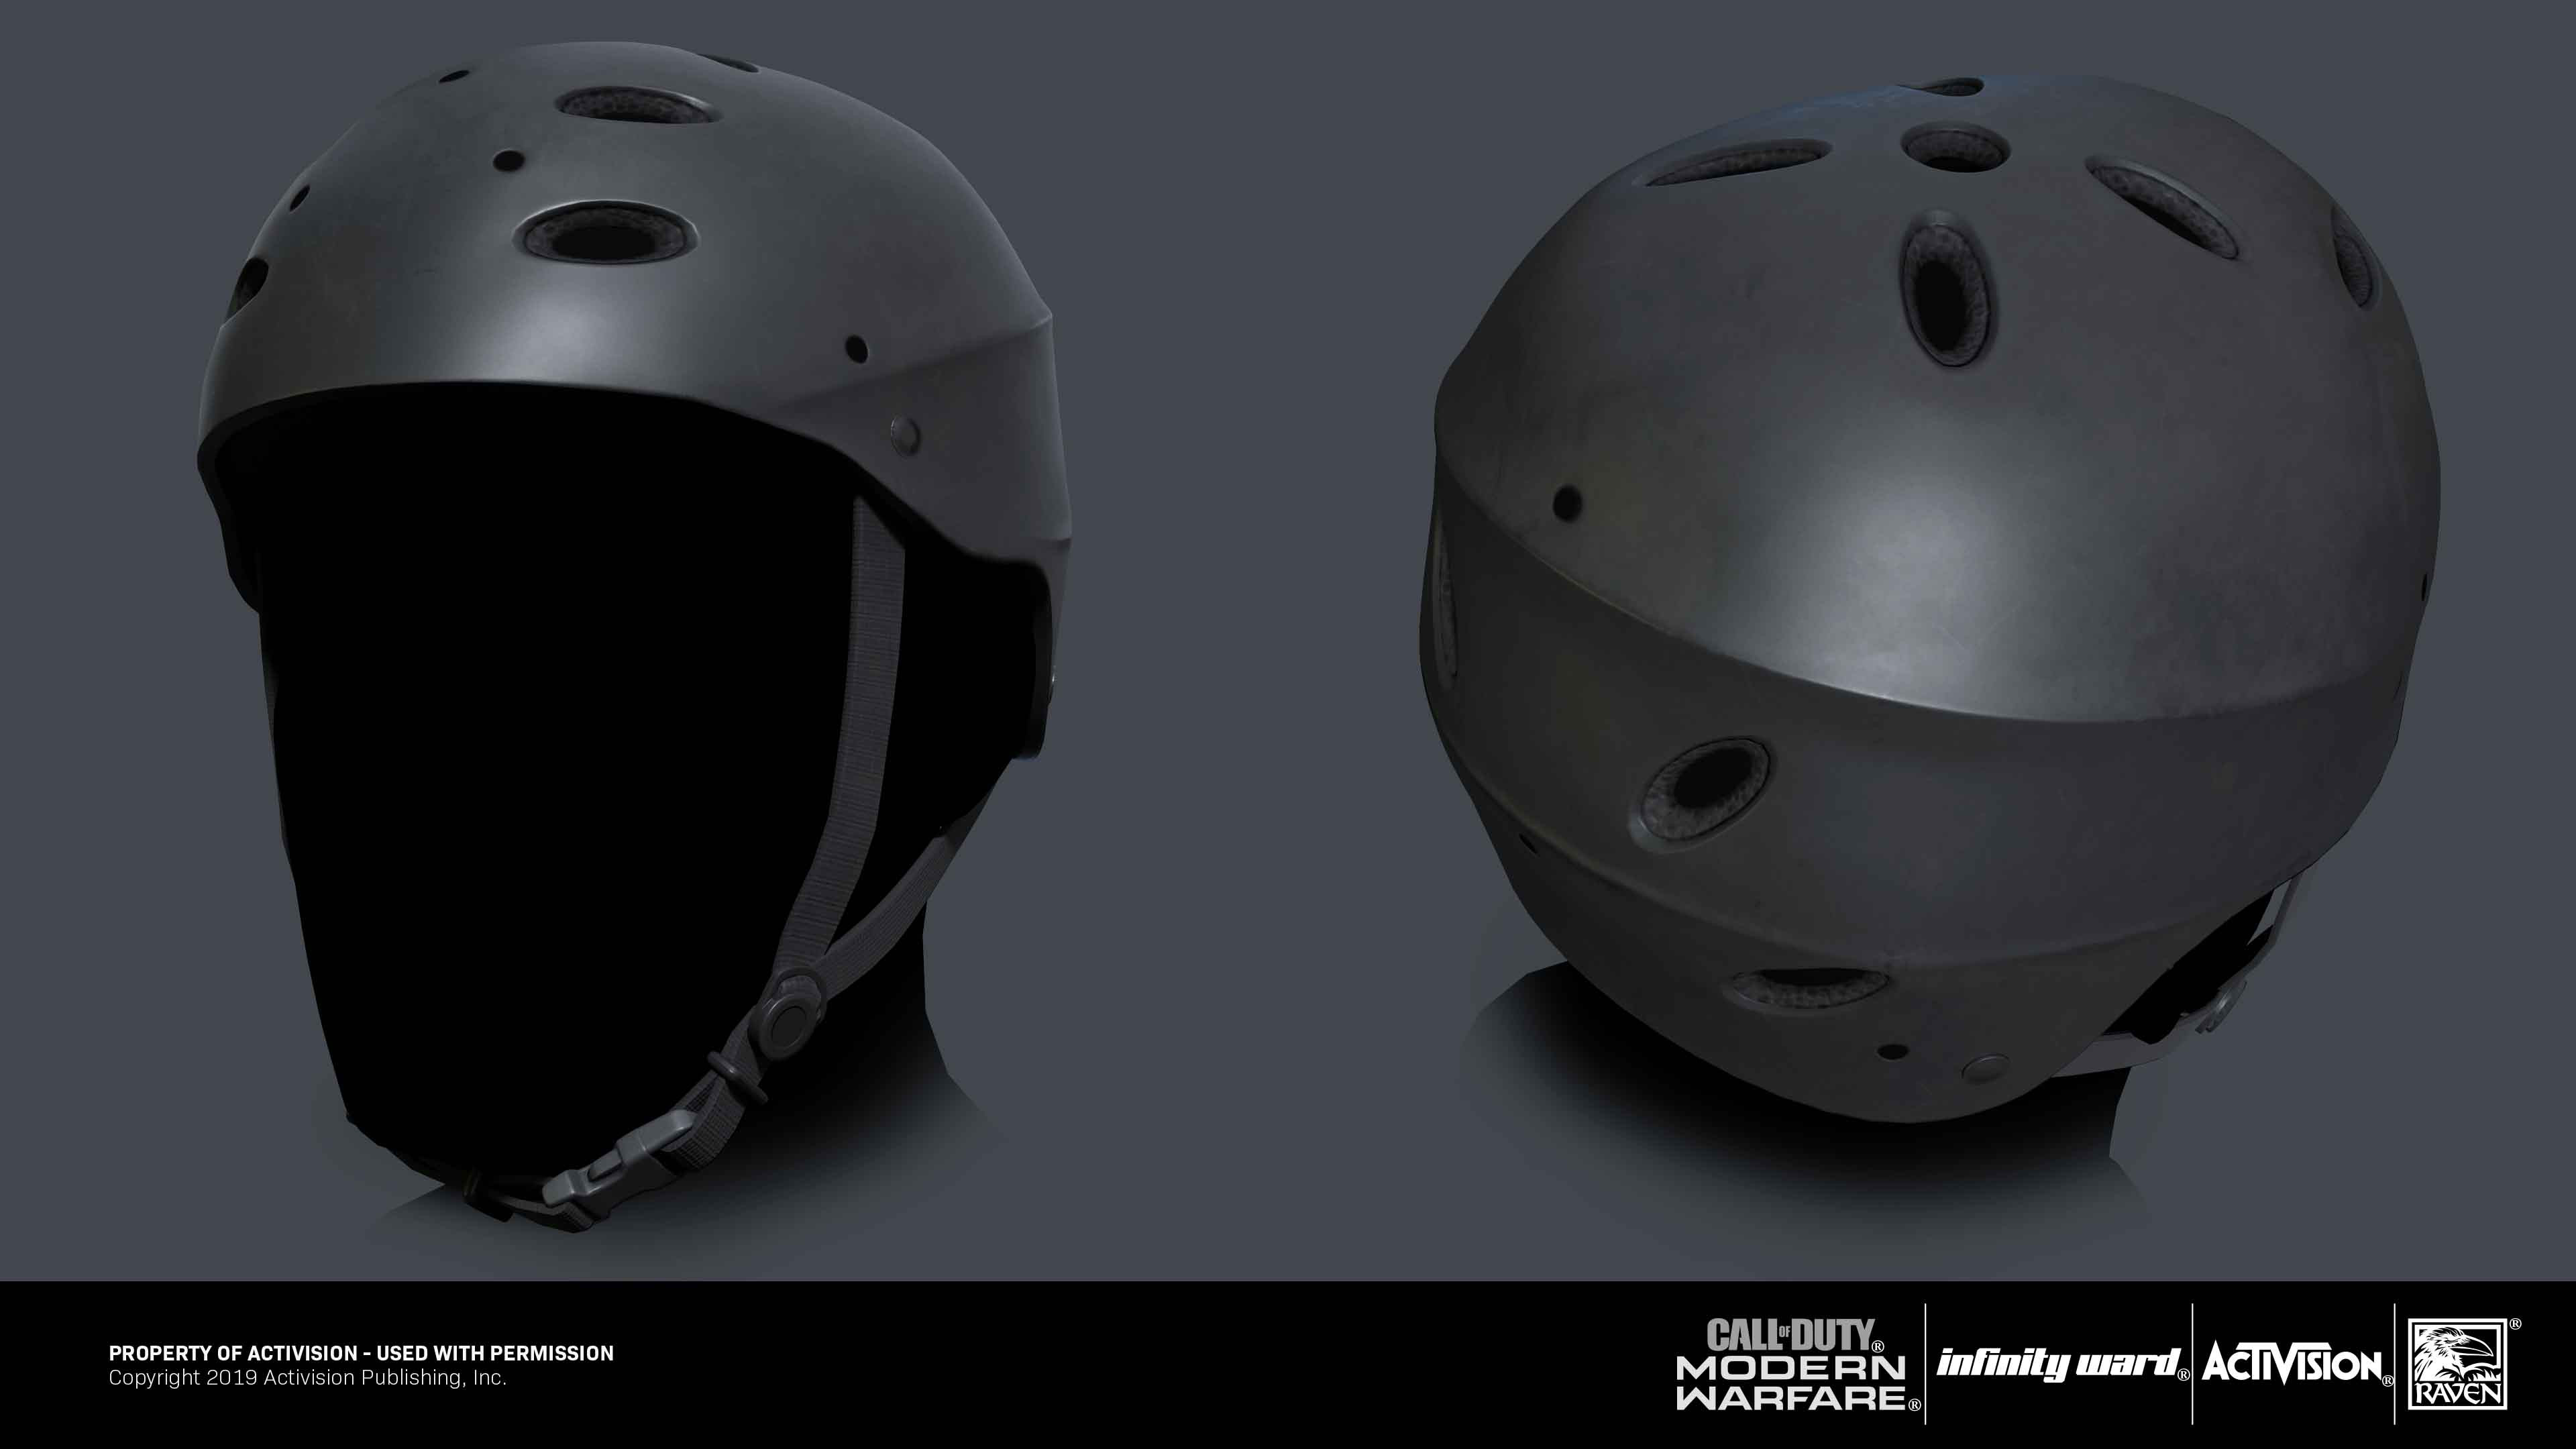 Helmet 2: Highpoly, lowpoly, bakes and textures.